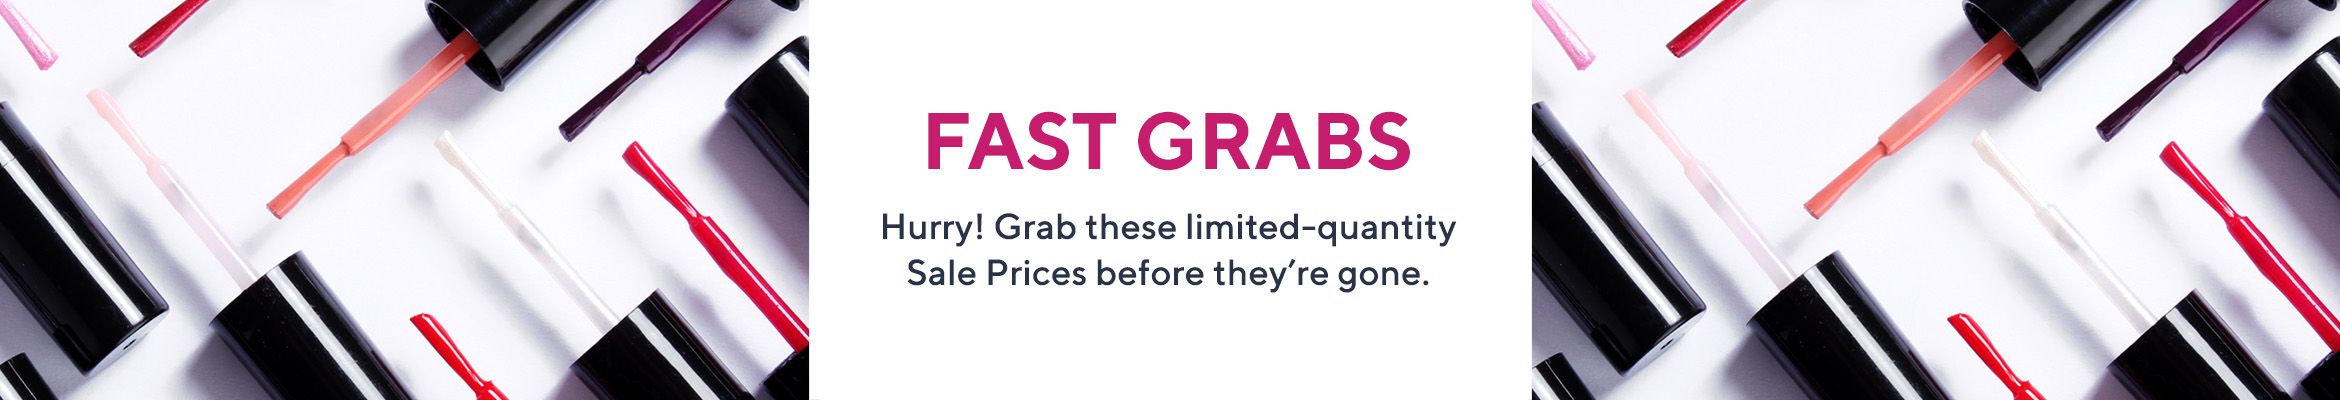 Fast Grabs -  Hurry! Grab these limited-quantity Sale Prices before they're gone.